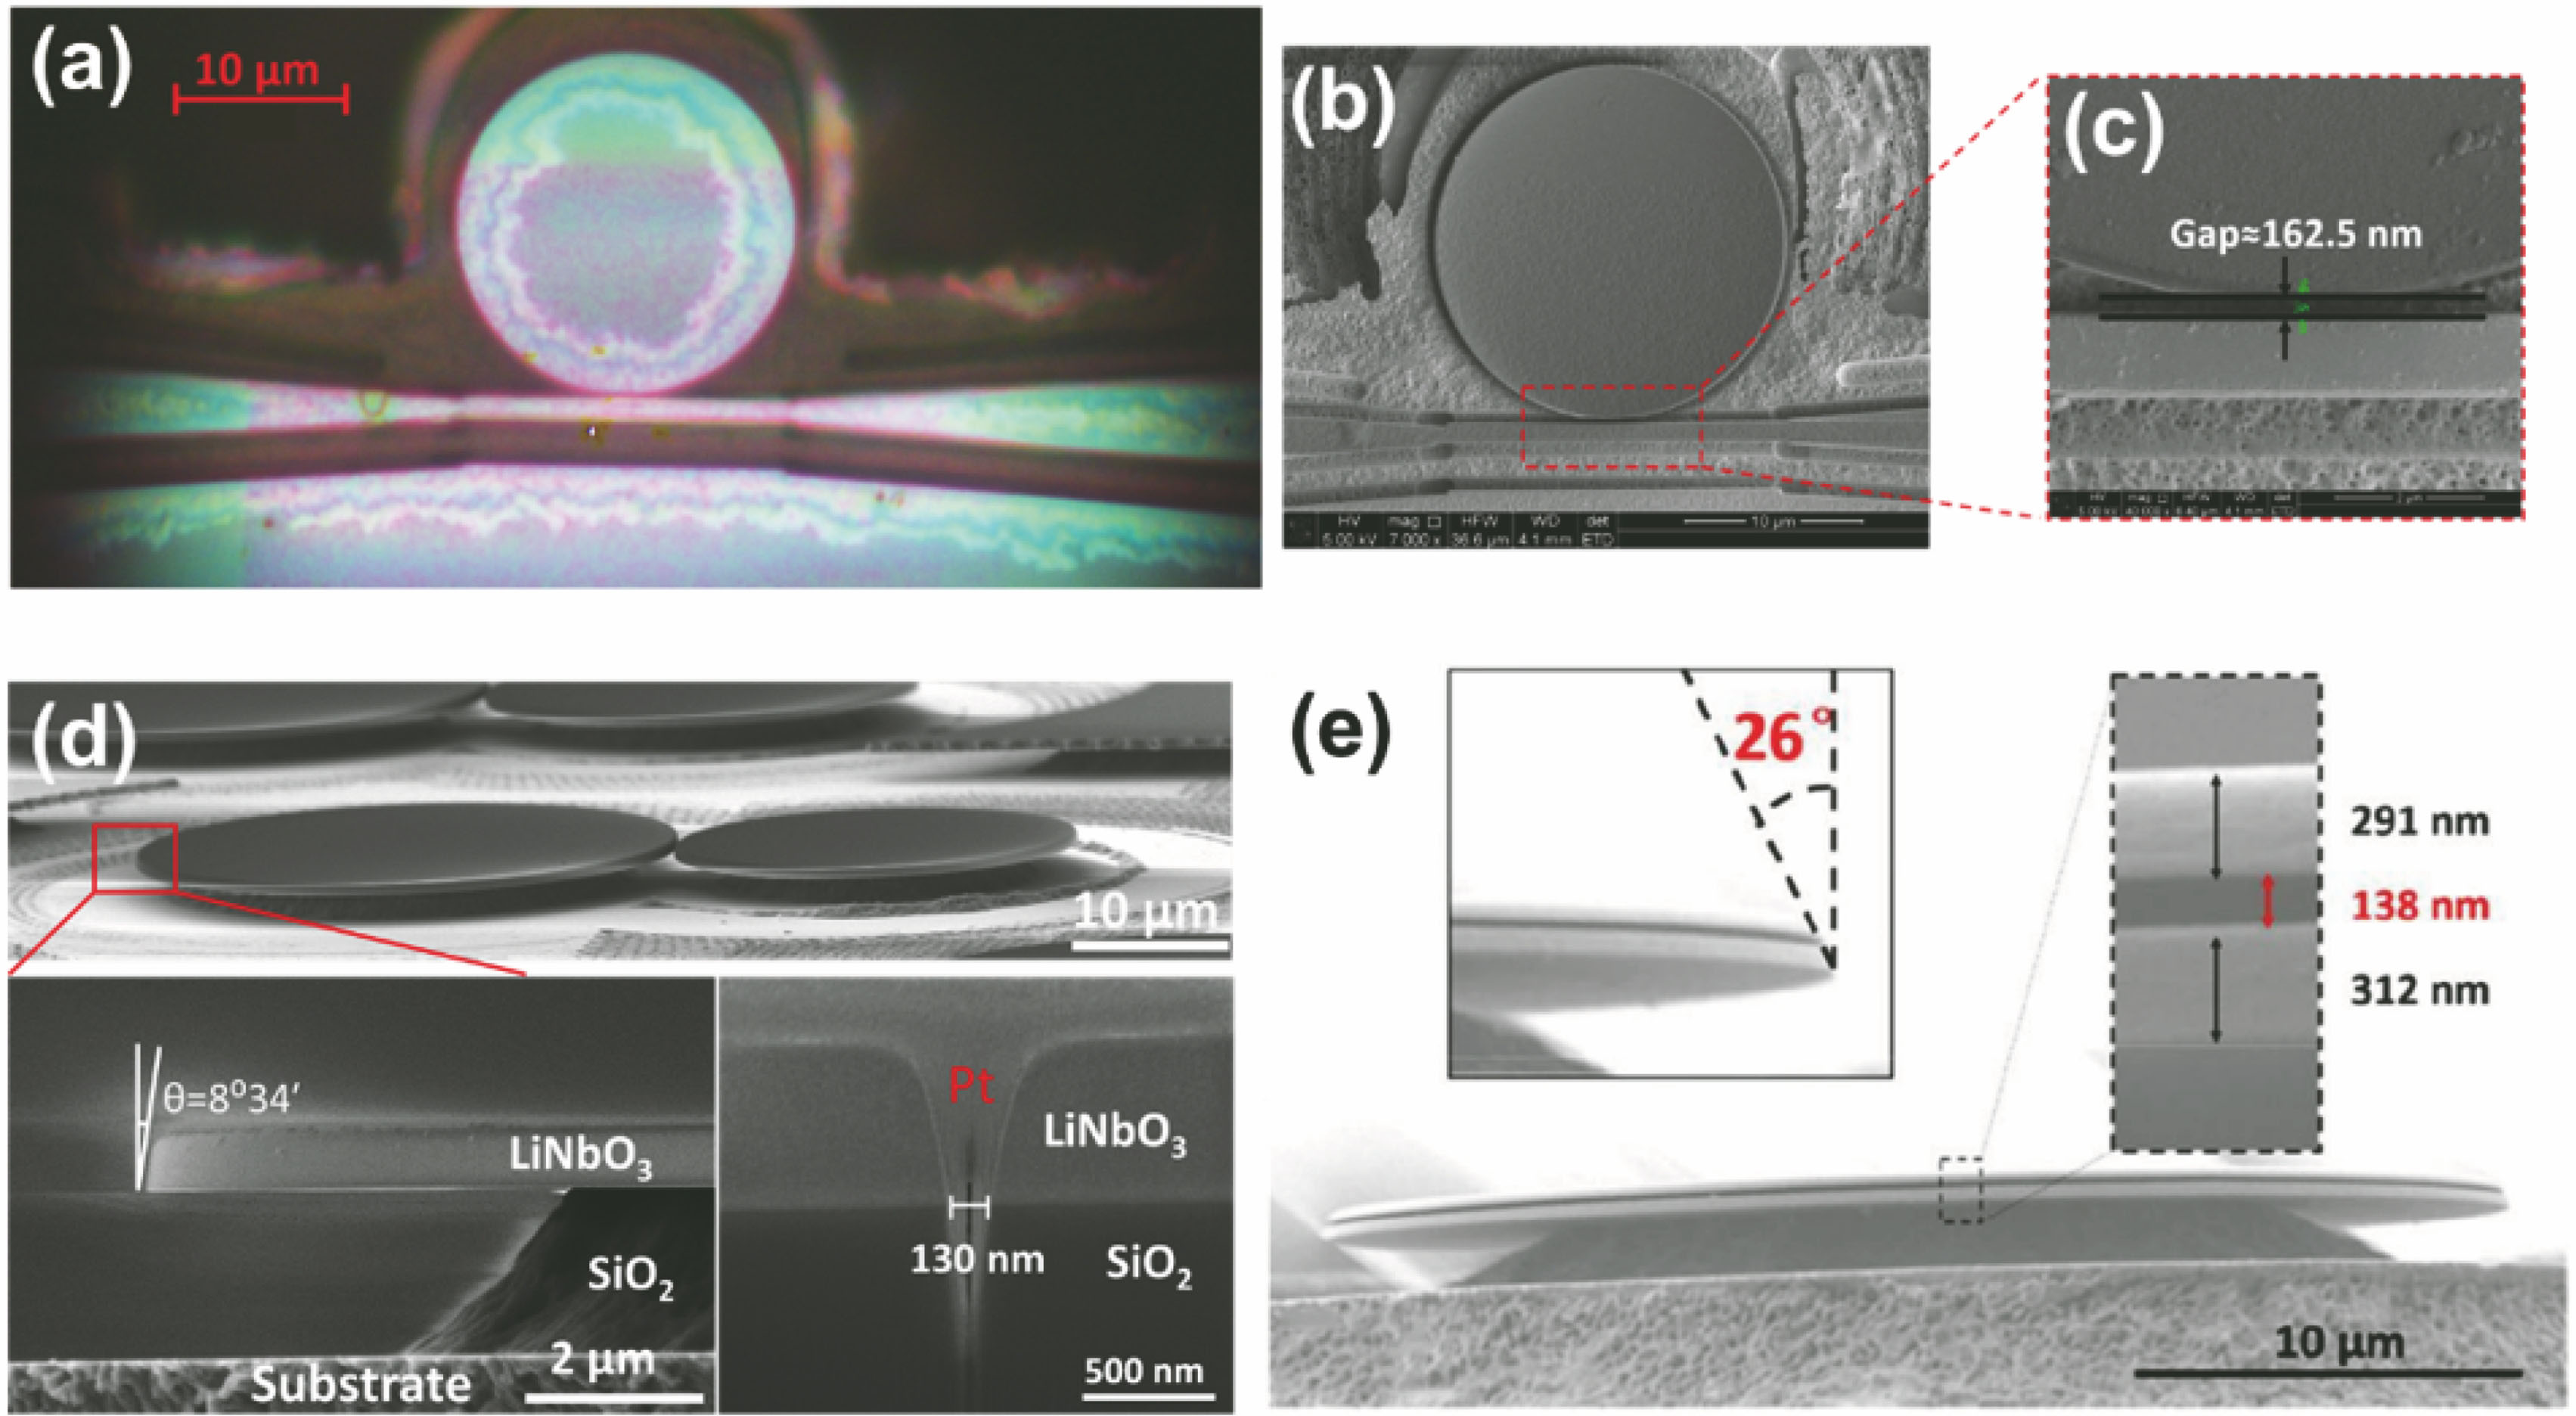 Integrated photonic structures fabricated by the femtosecond laser writing combined with focused ion beam milling. (a)-(c) Monolithic integration of an LN microdisk with a free-standing waveguide[40]; (d) coupled LN microdisk photonic molecules[41]; (e) vertical integration of double LN microdisks[42]